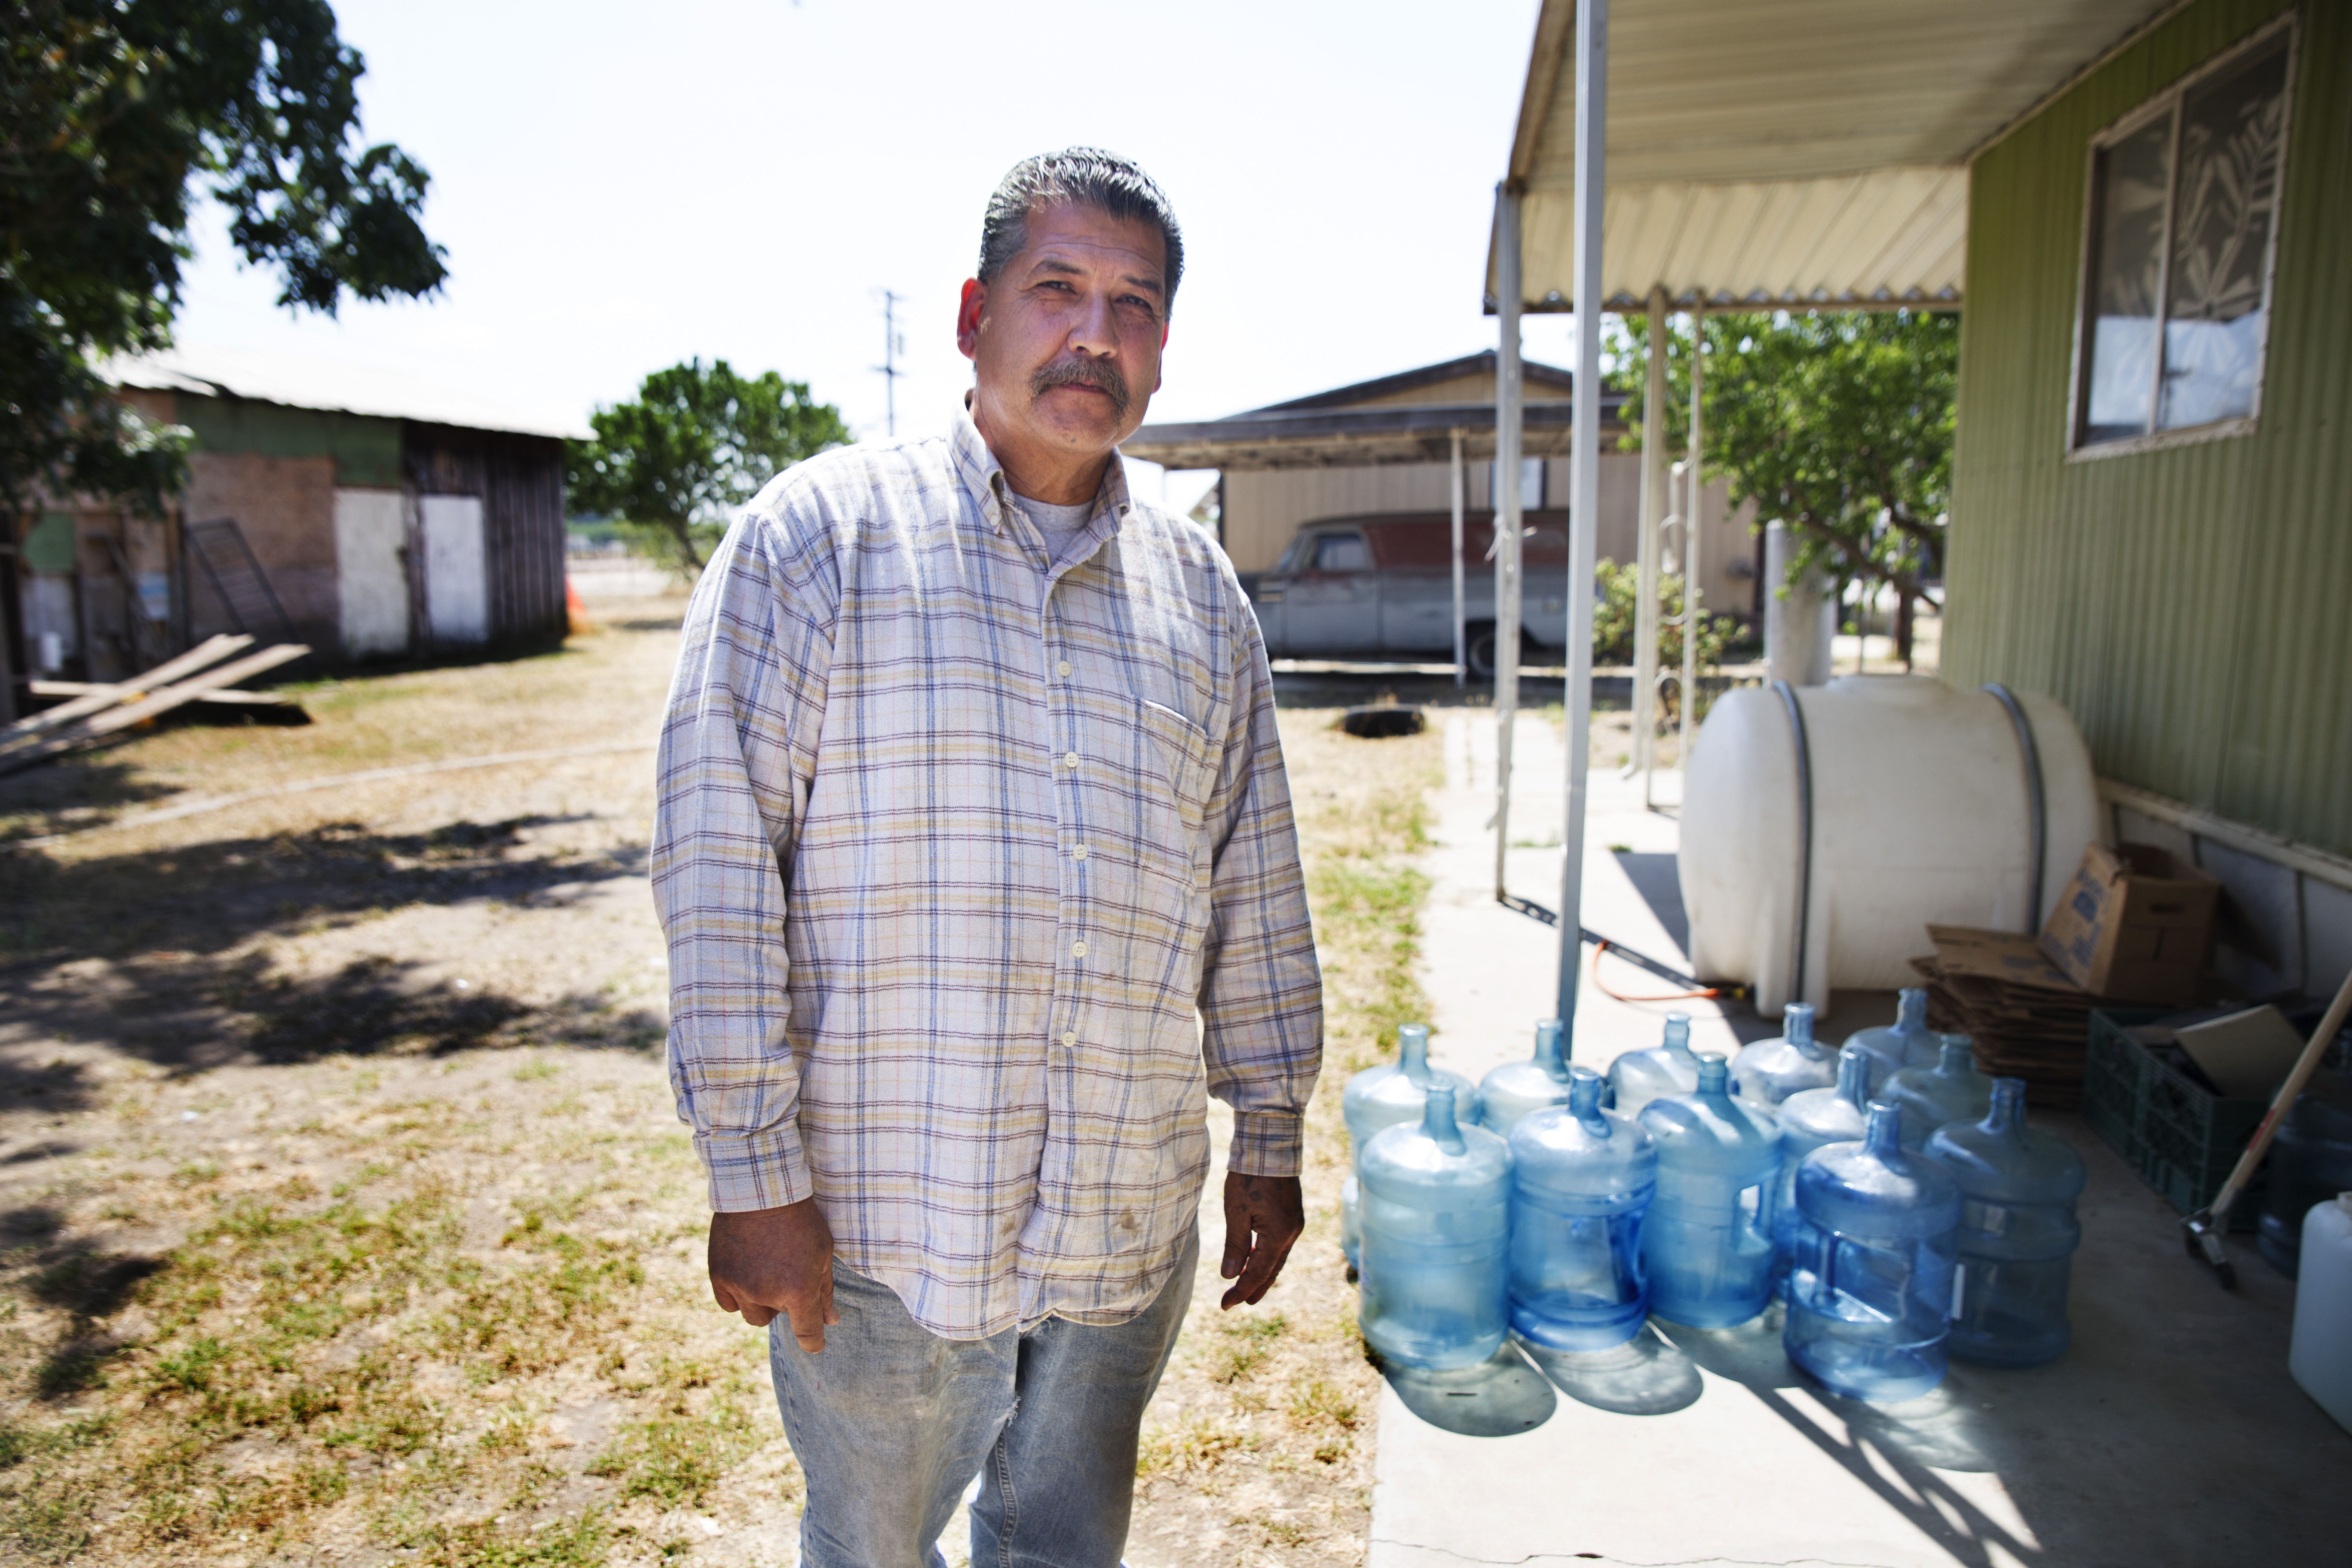 Jimmy Moreno, who resides on the southern edge of Visalia, has been without water since August 2014 when his well went dry. 